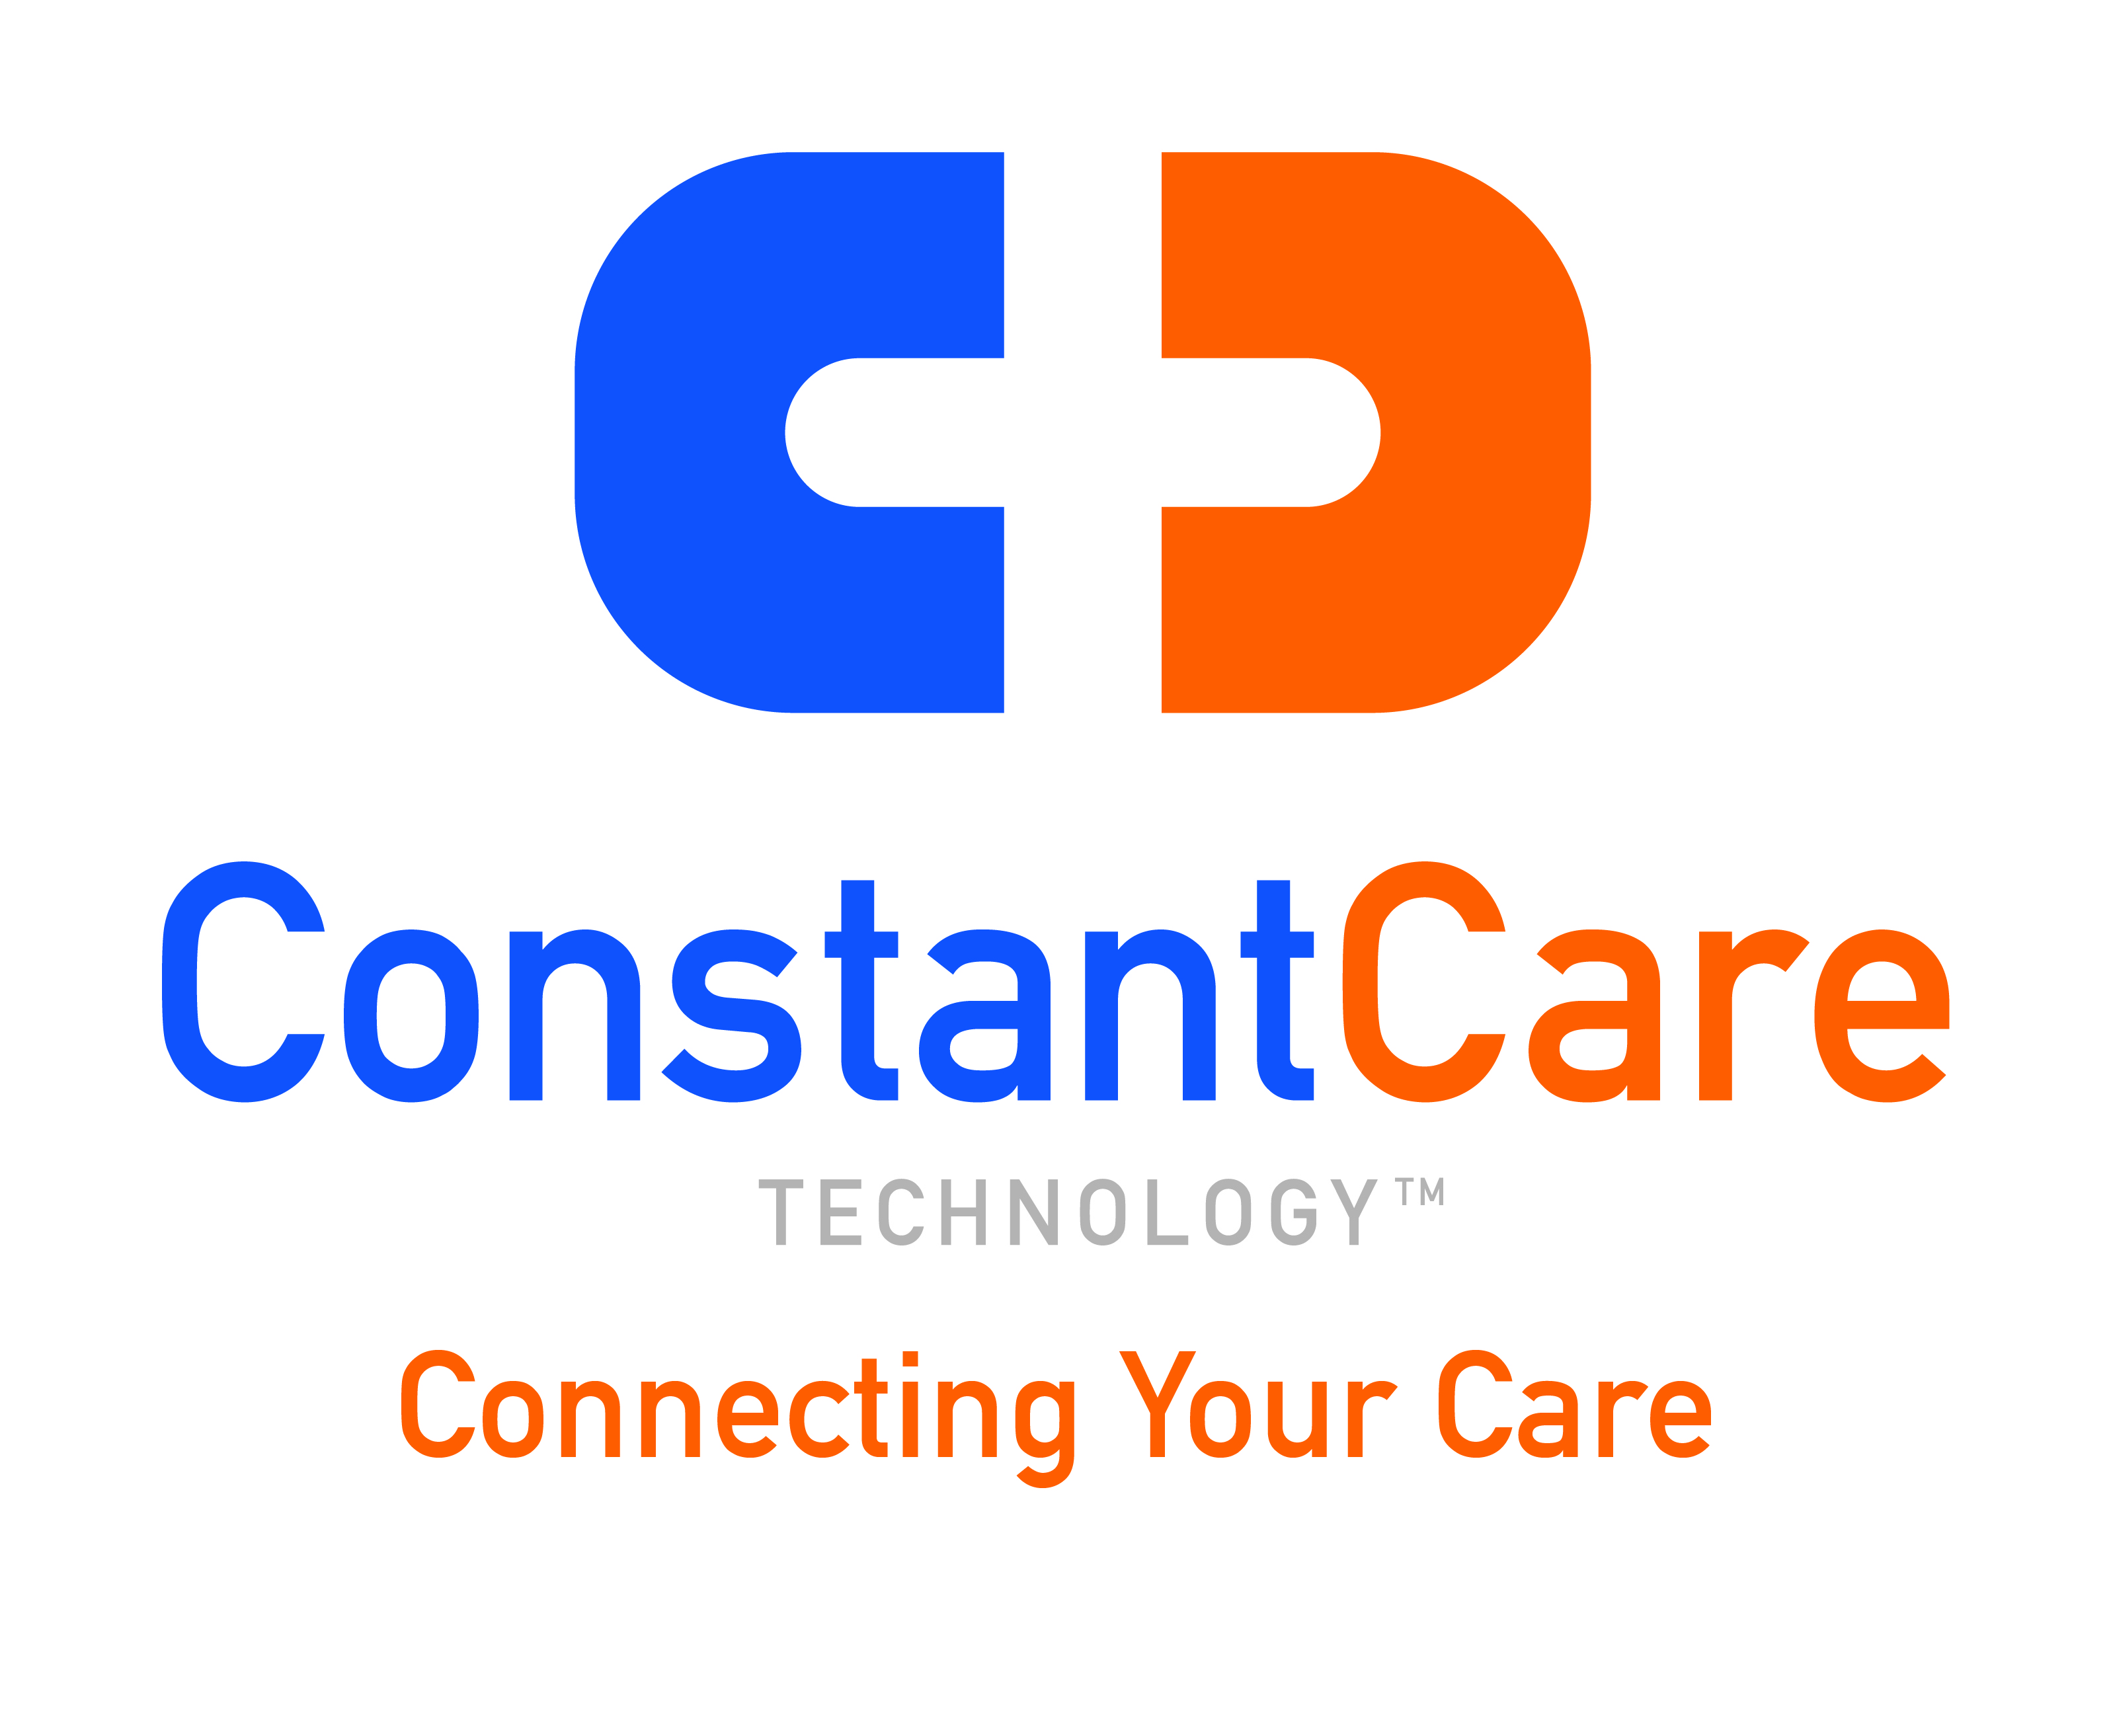 Constant Care Technology